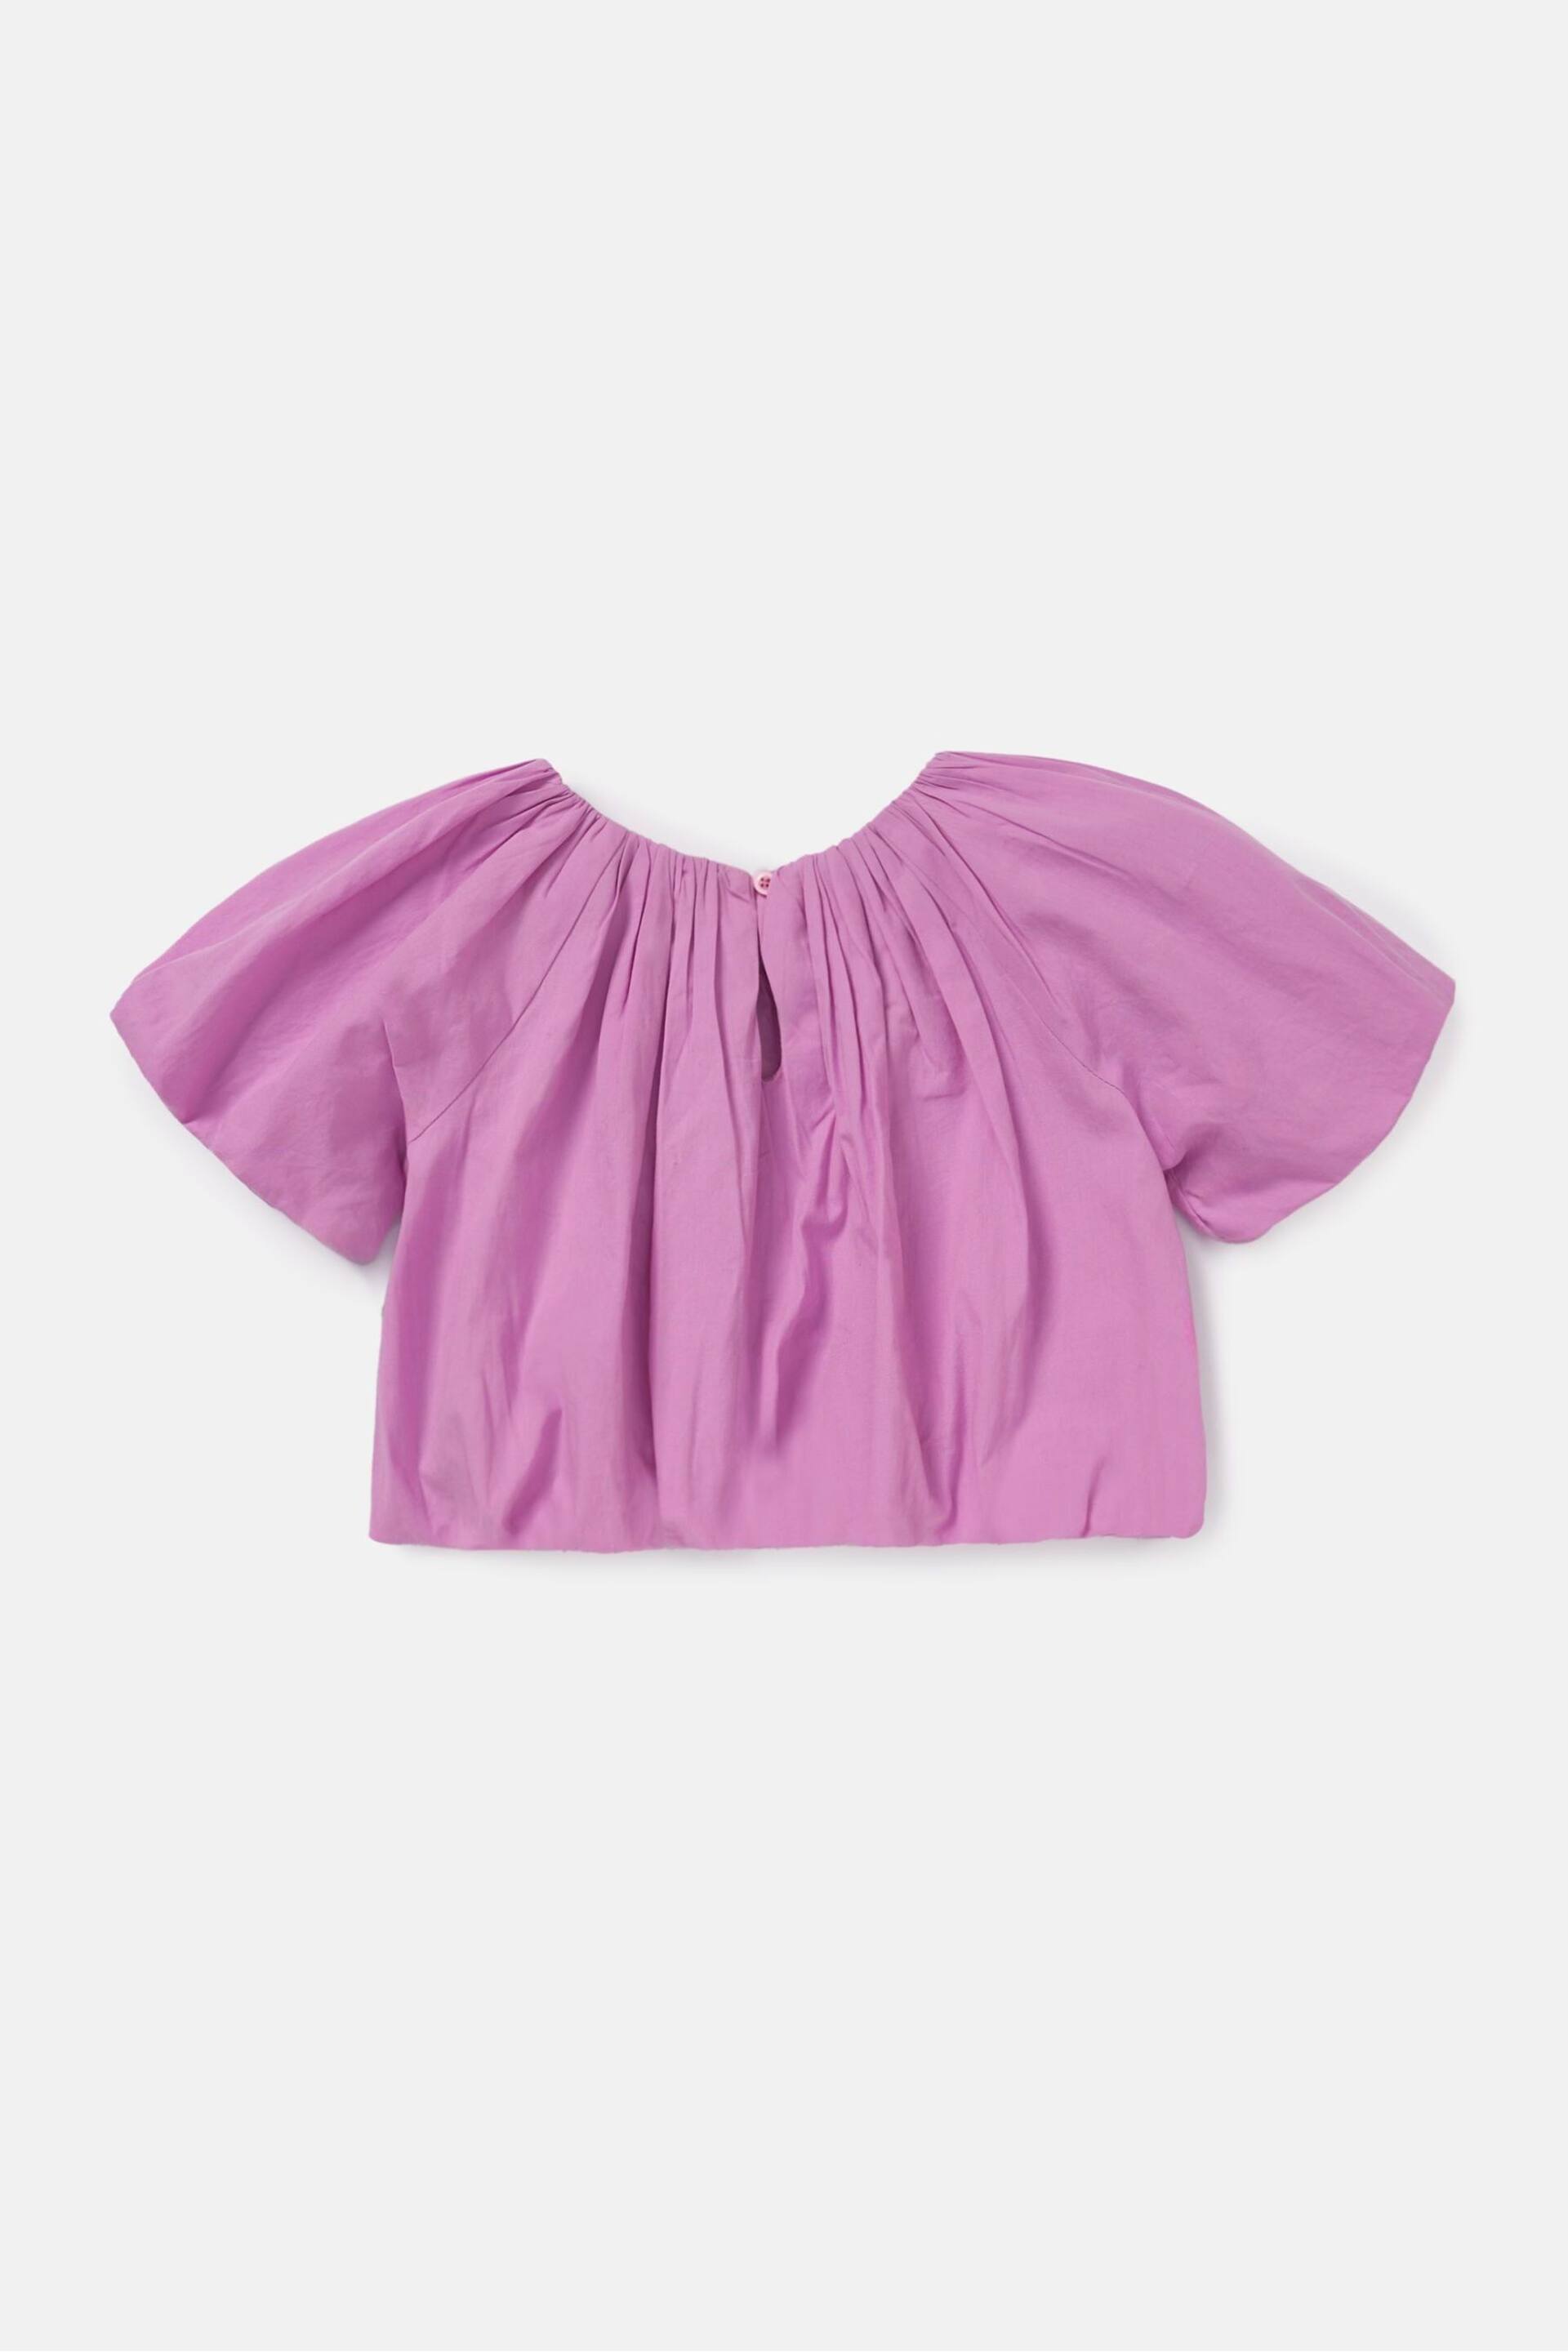 Angel & Rocket Pink Puff Sleeve Michela Woven Top - Image 3 of 4